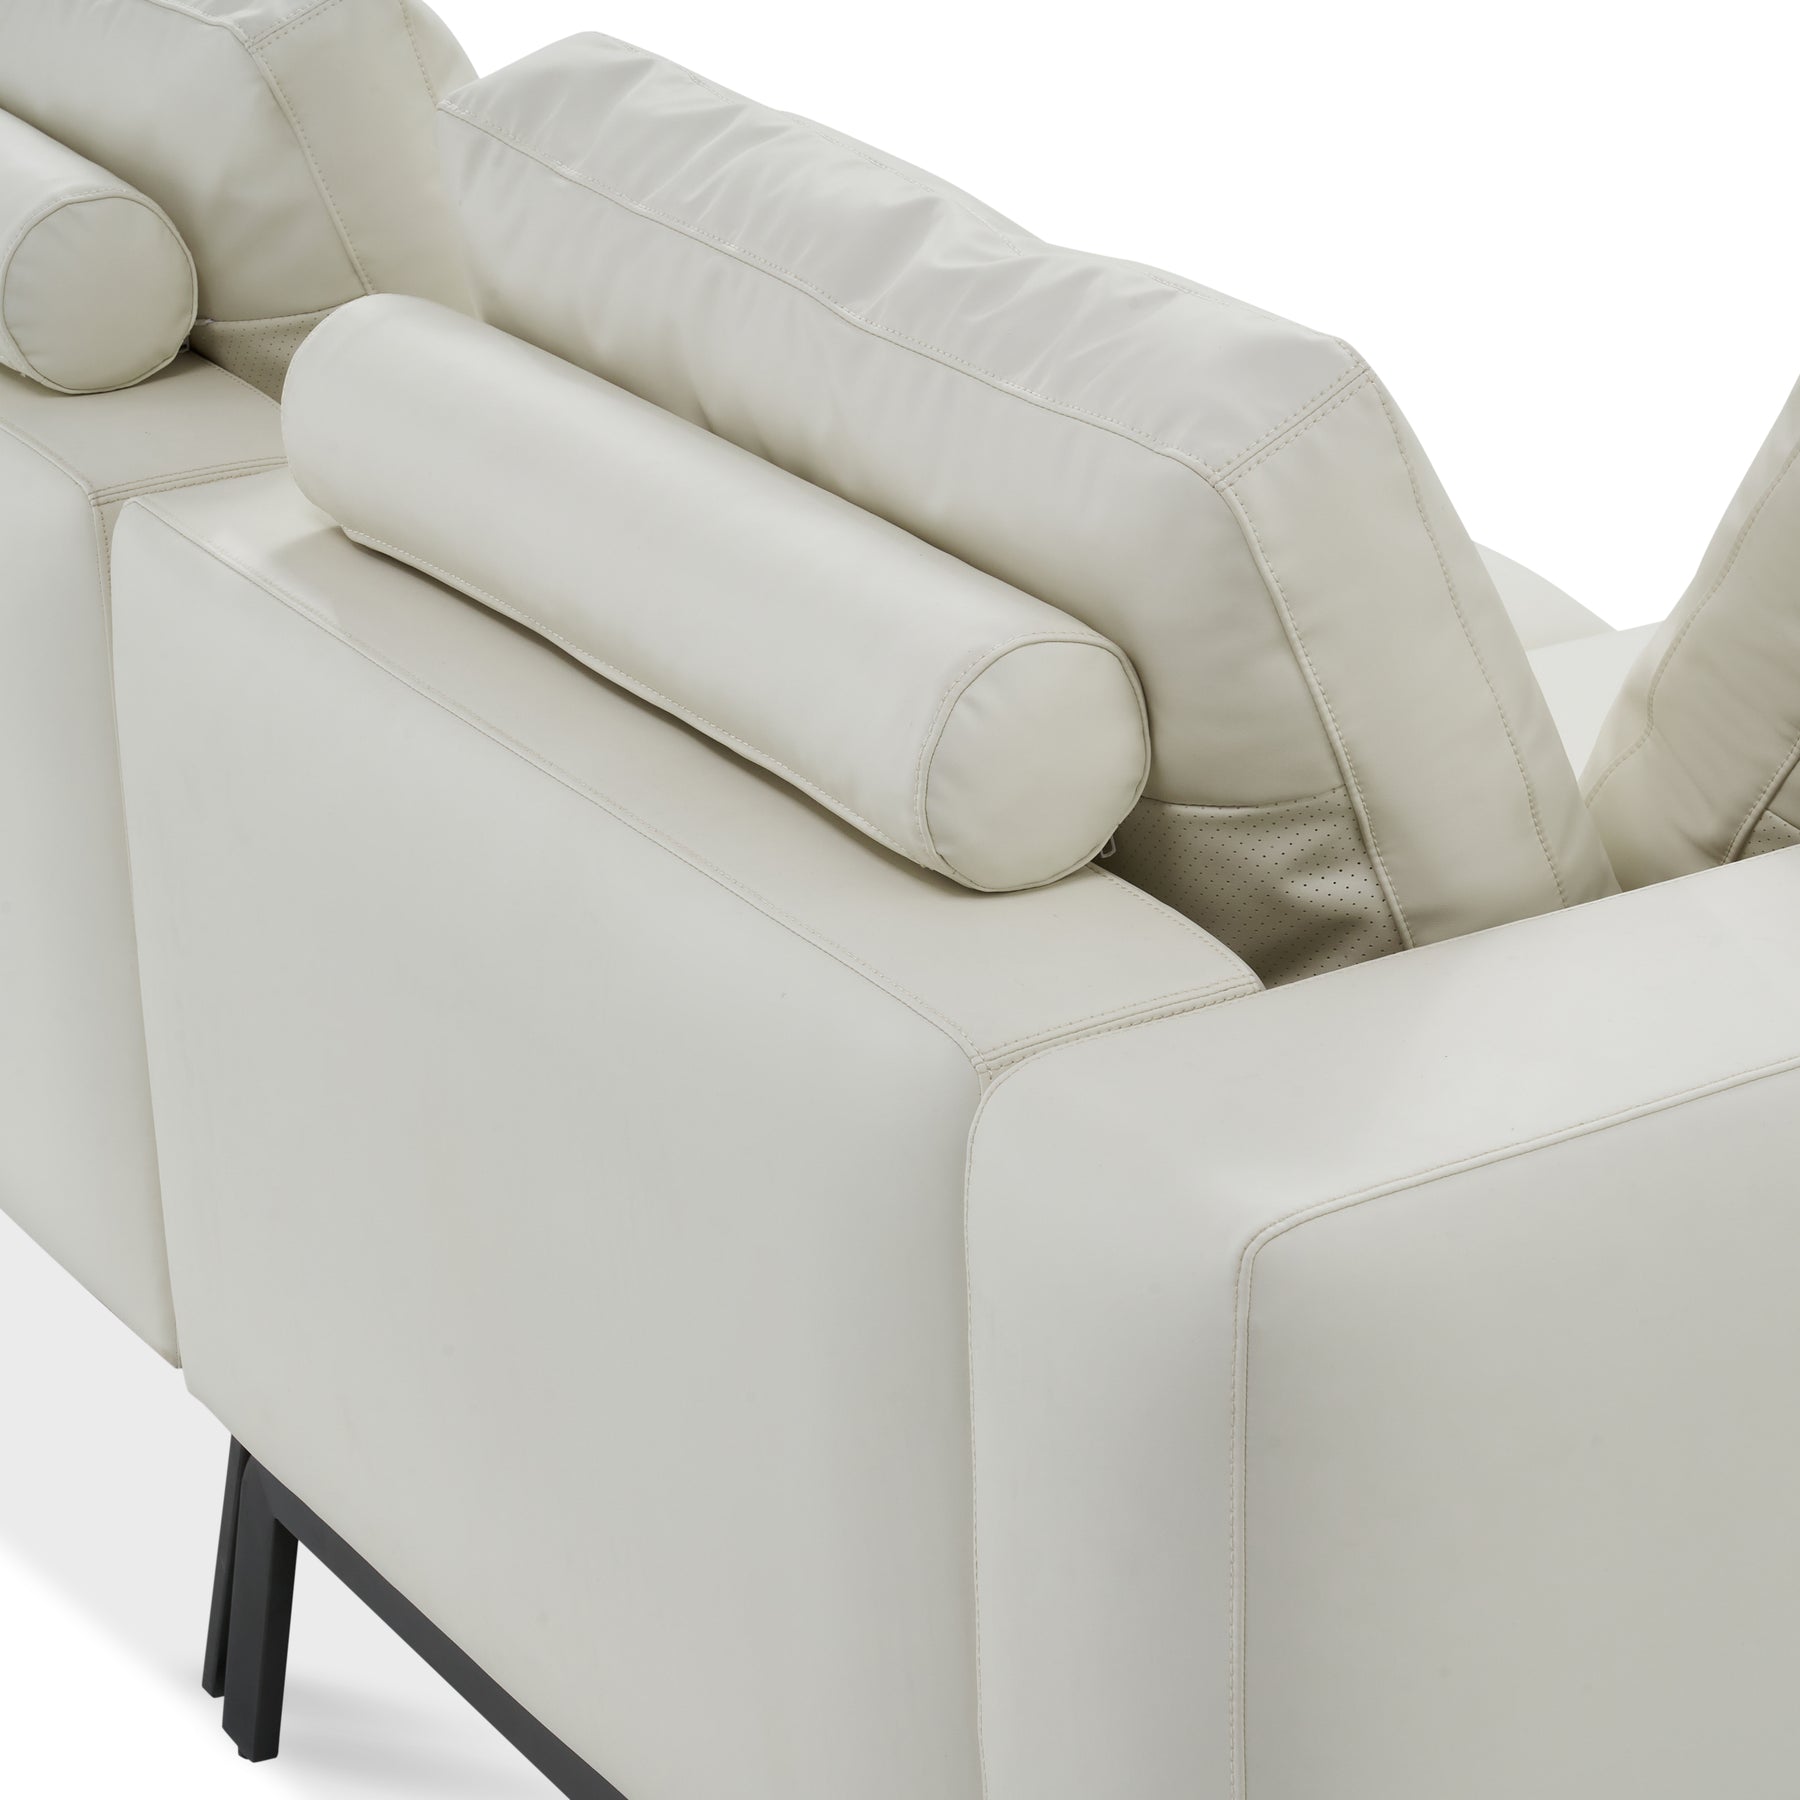 Modern Italian White Microfiber Leather Right Corner Sectional Sofa, with Armrest